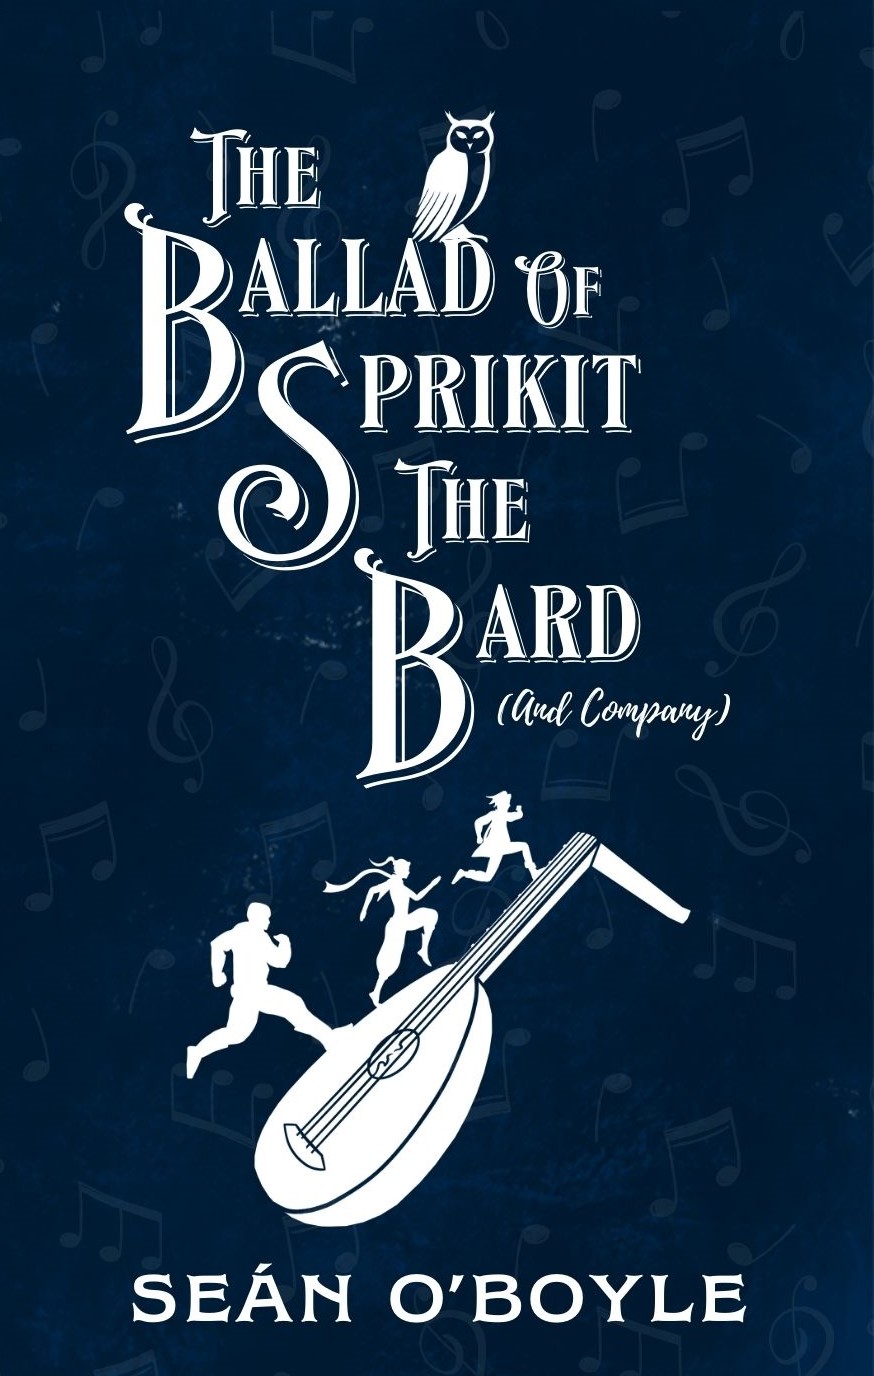 The Ballad of Sprikit the Bard (And Company)